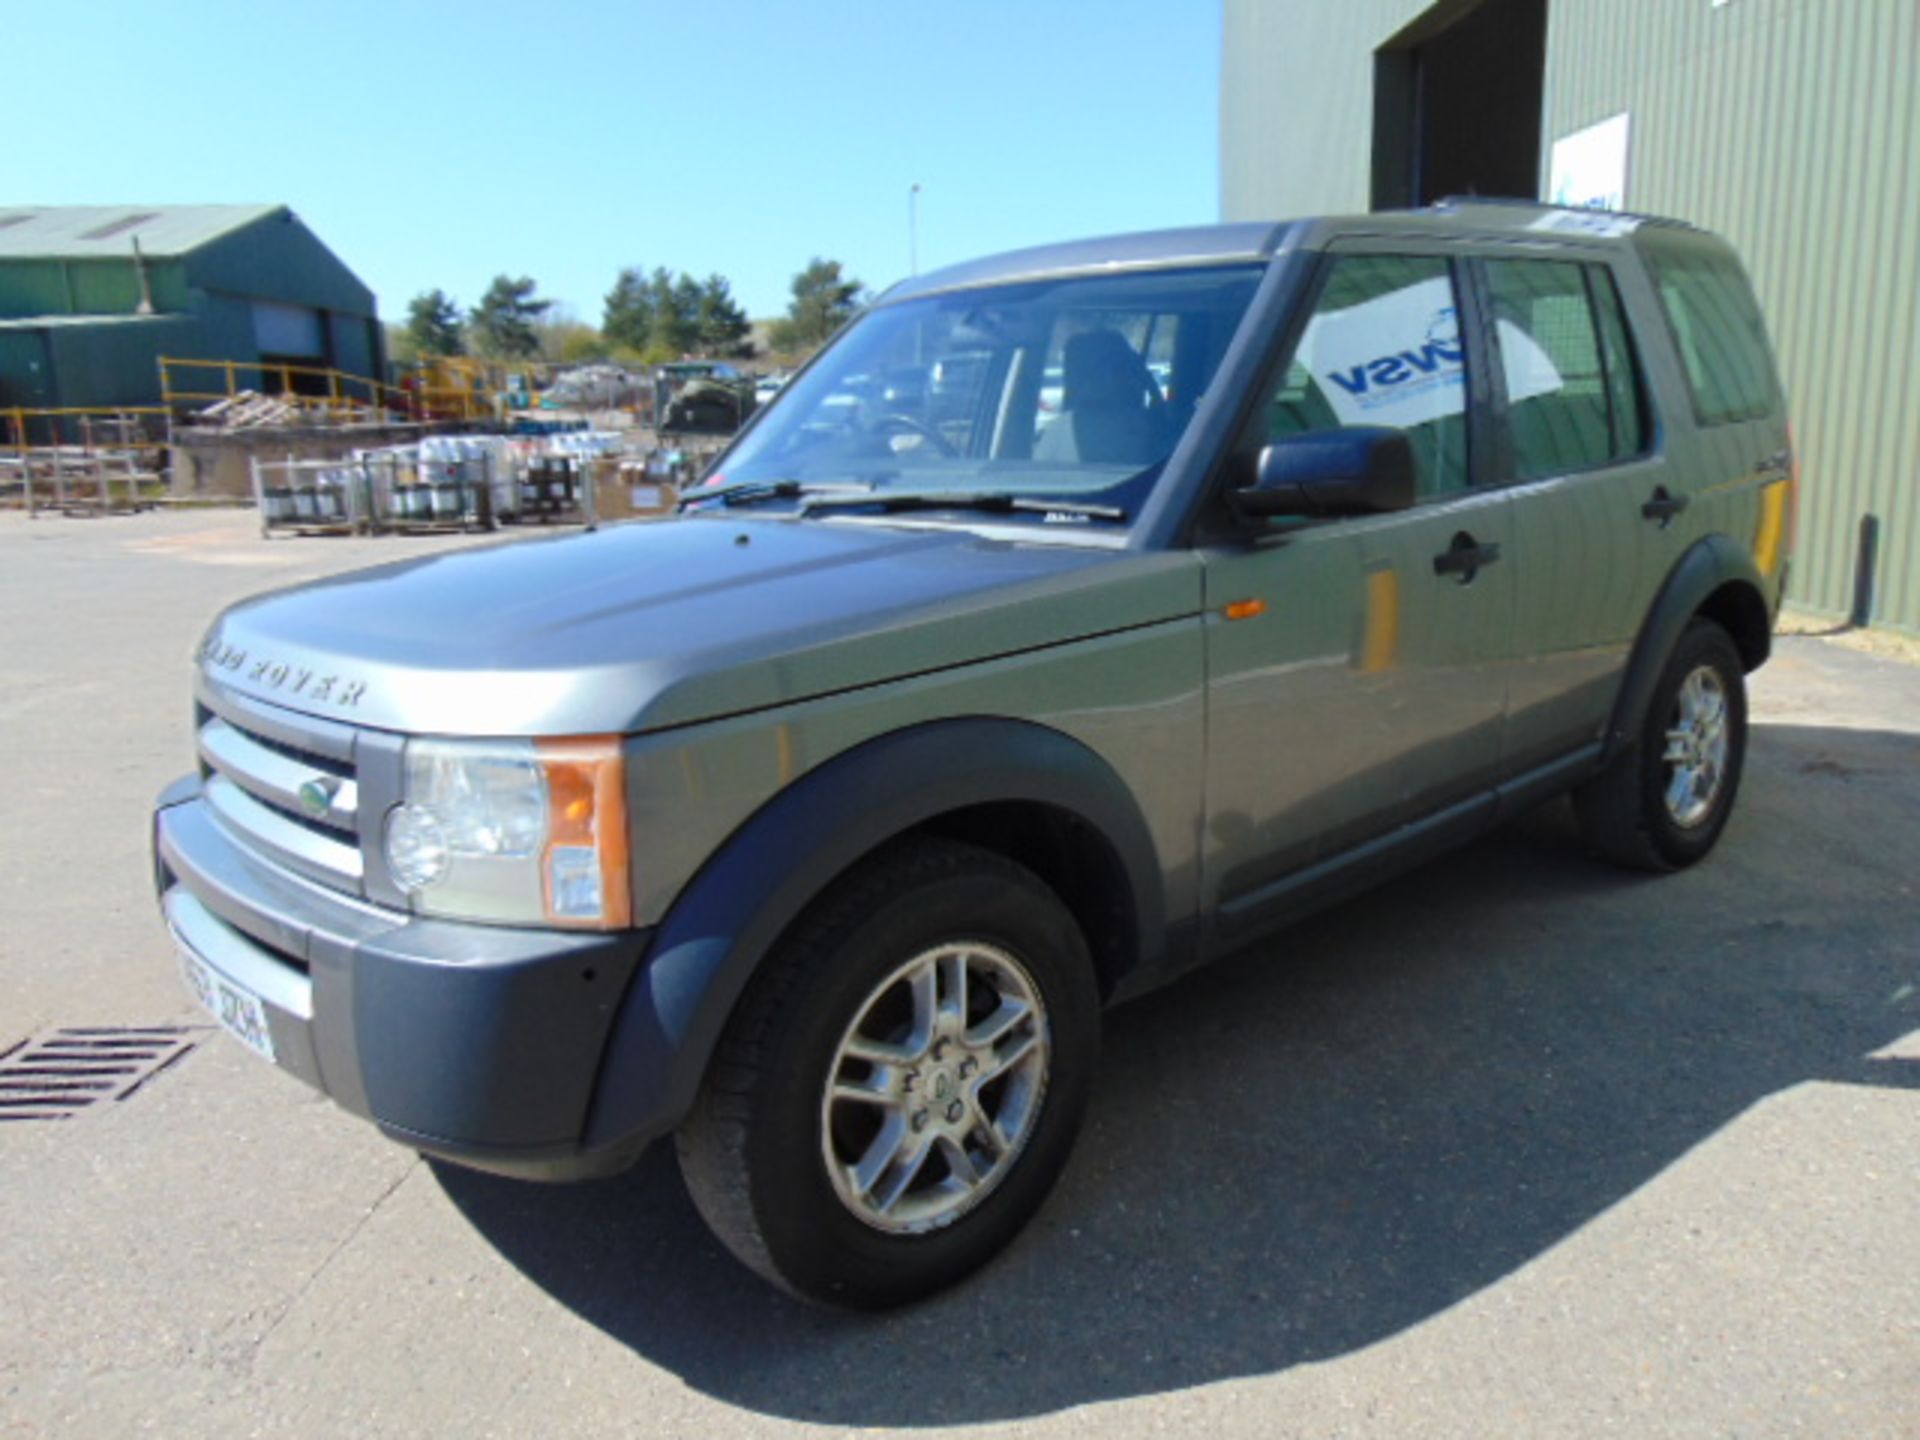 1 Owner 2007 Land Rover Discovery 3 TDV6 5d Manual ONLY 80,011 MILES! - Image 3 of 26